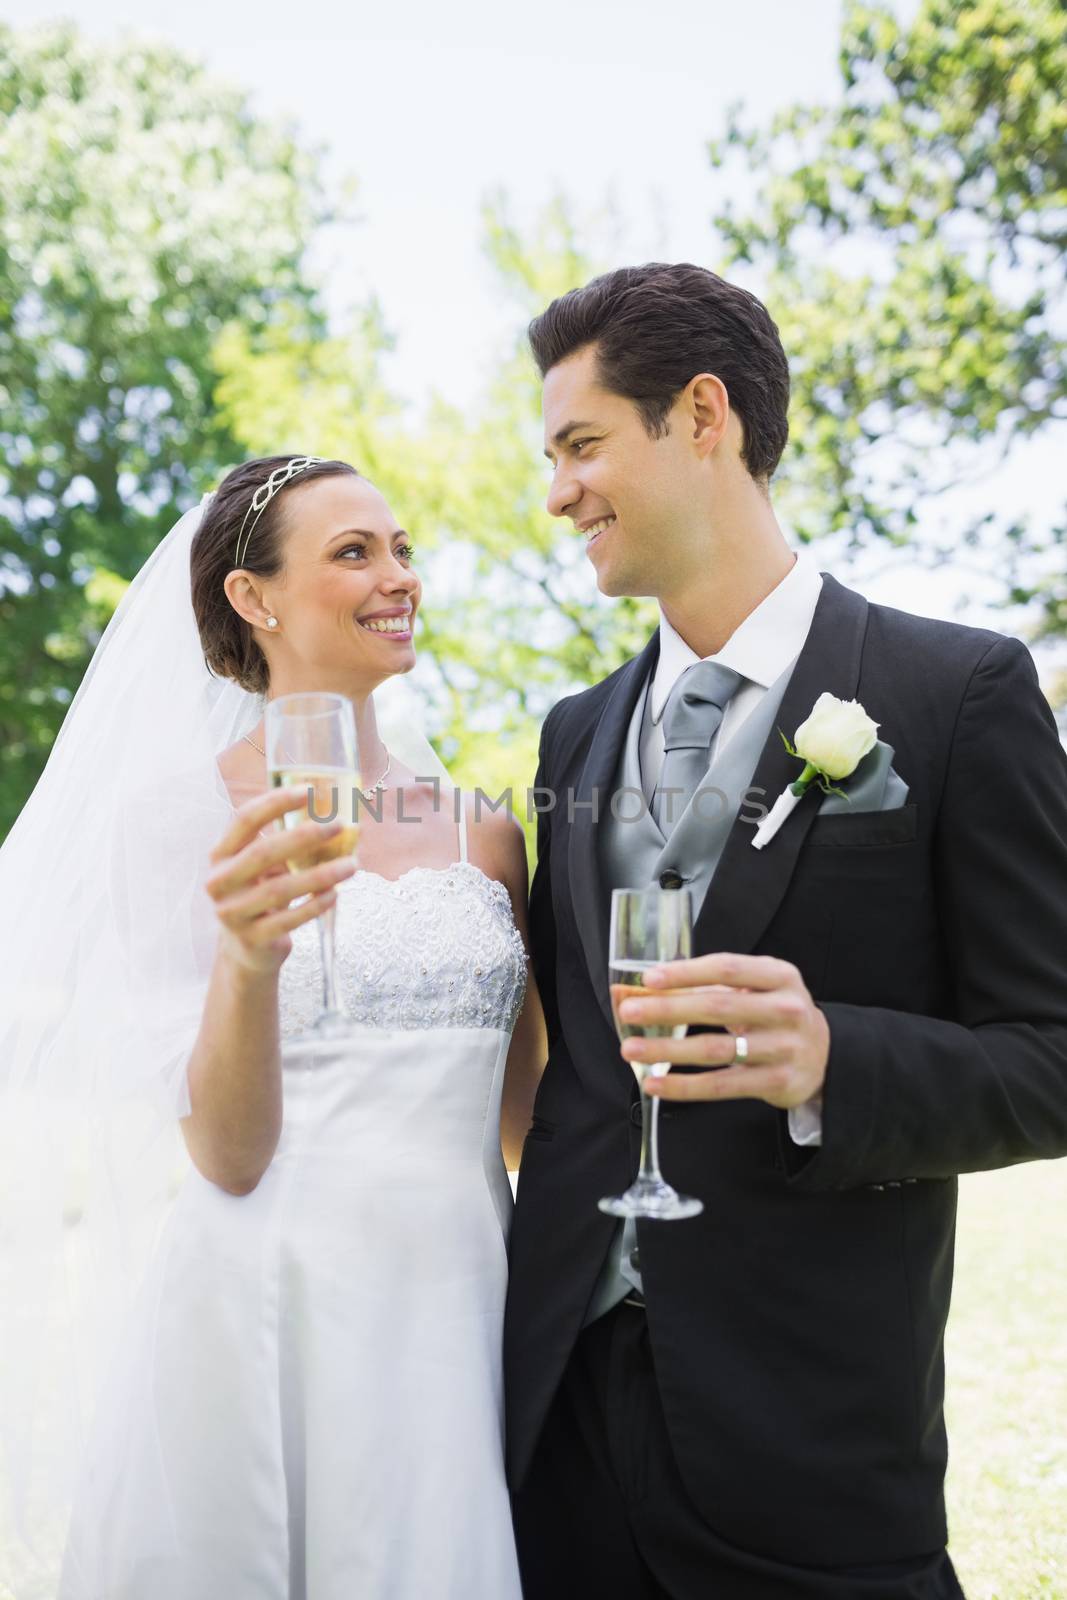 Romantic bride and groom having champagne while looking at each other in park